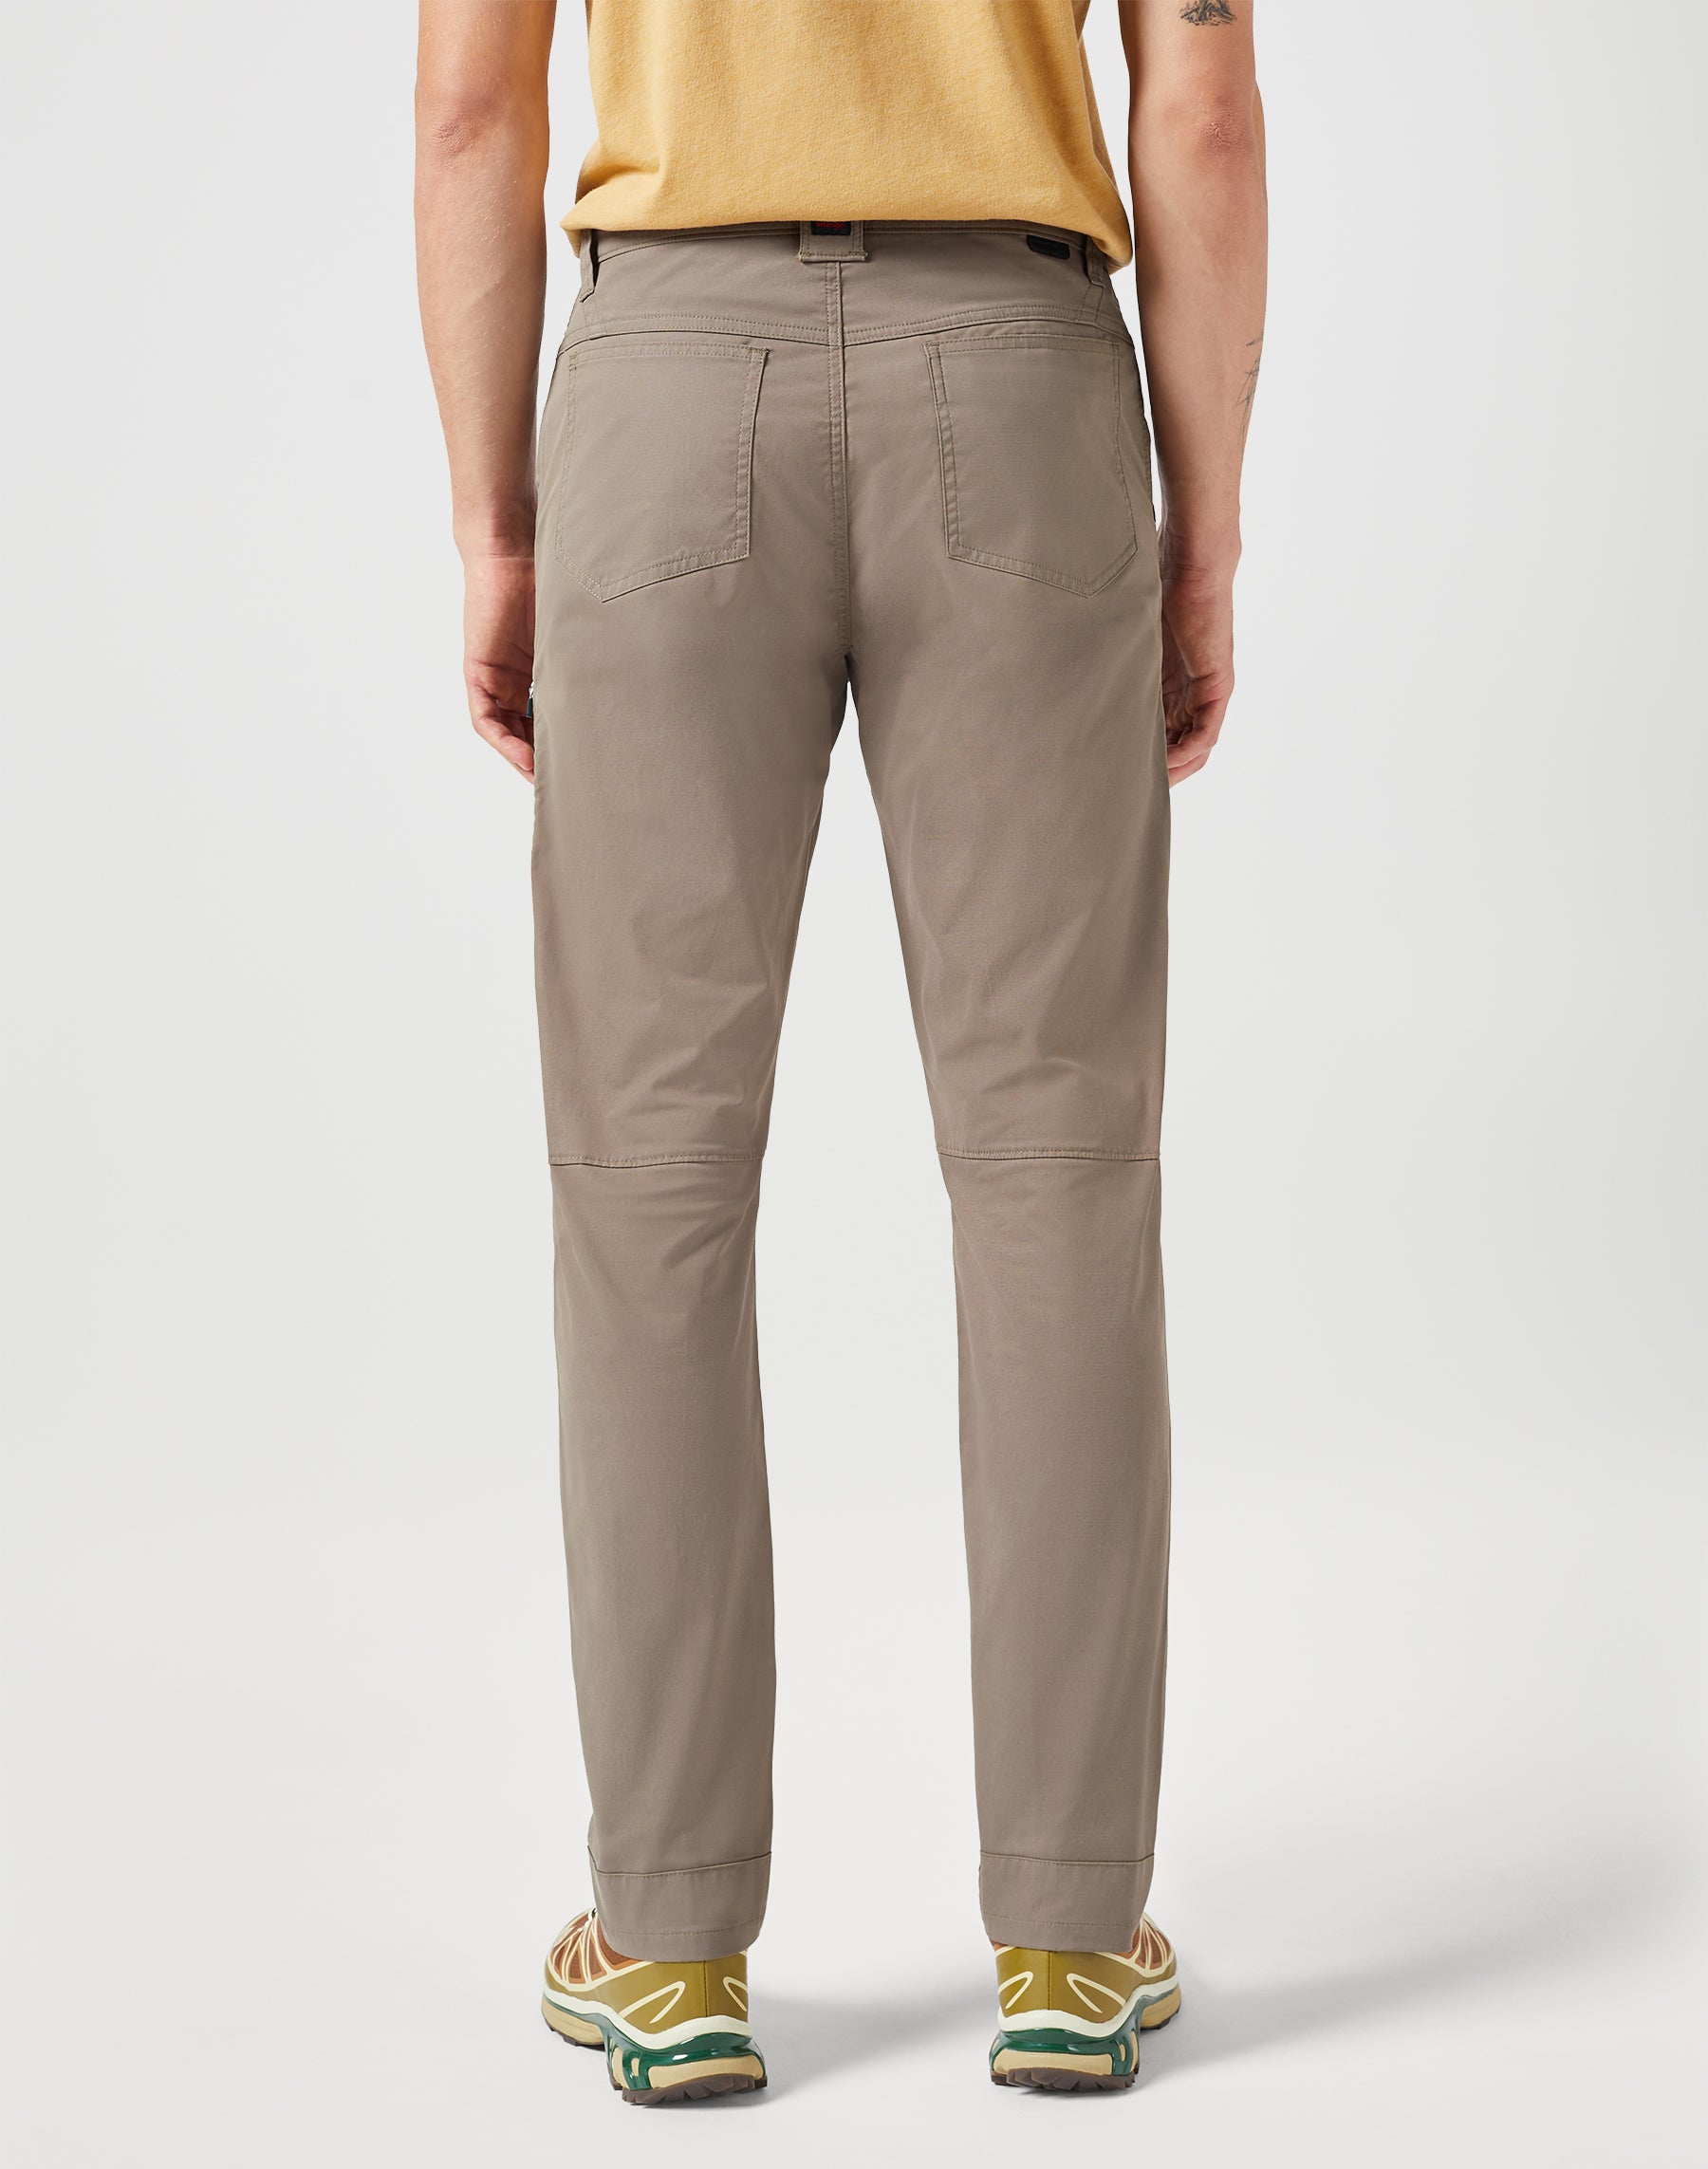 Sustainable Utility Pant in Bungee Cord Hosen Wrangler   